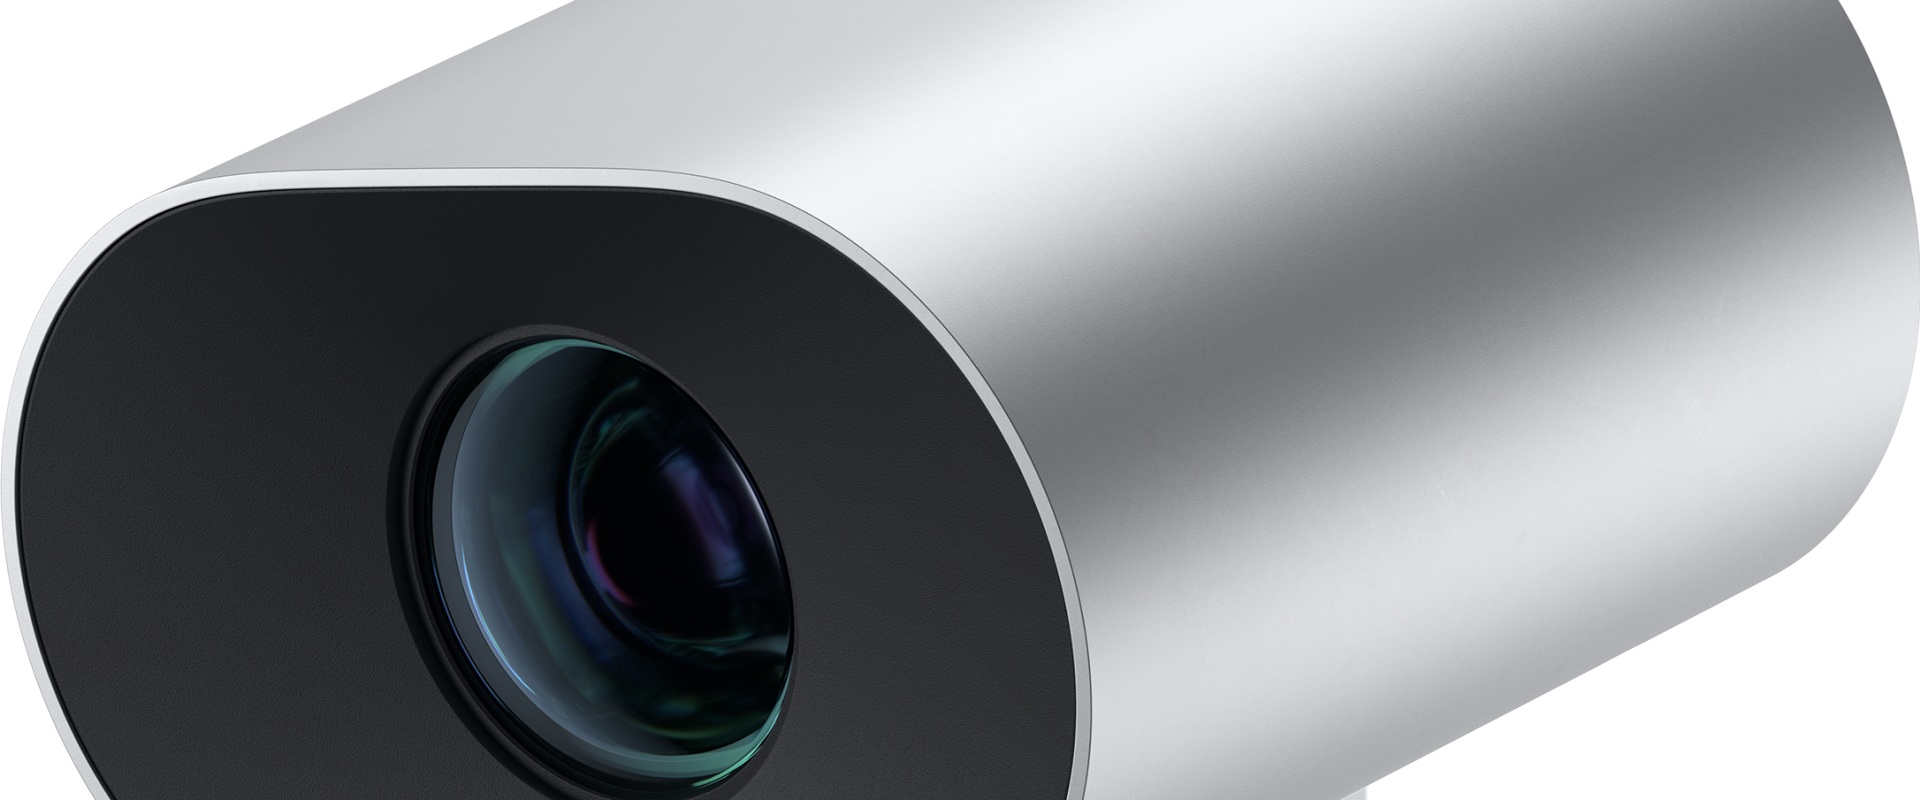 Lens Type and Zoom Capabilities for Video Conferencing Cameras